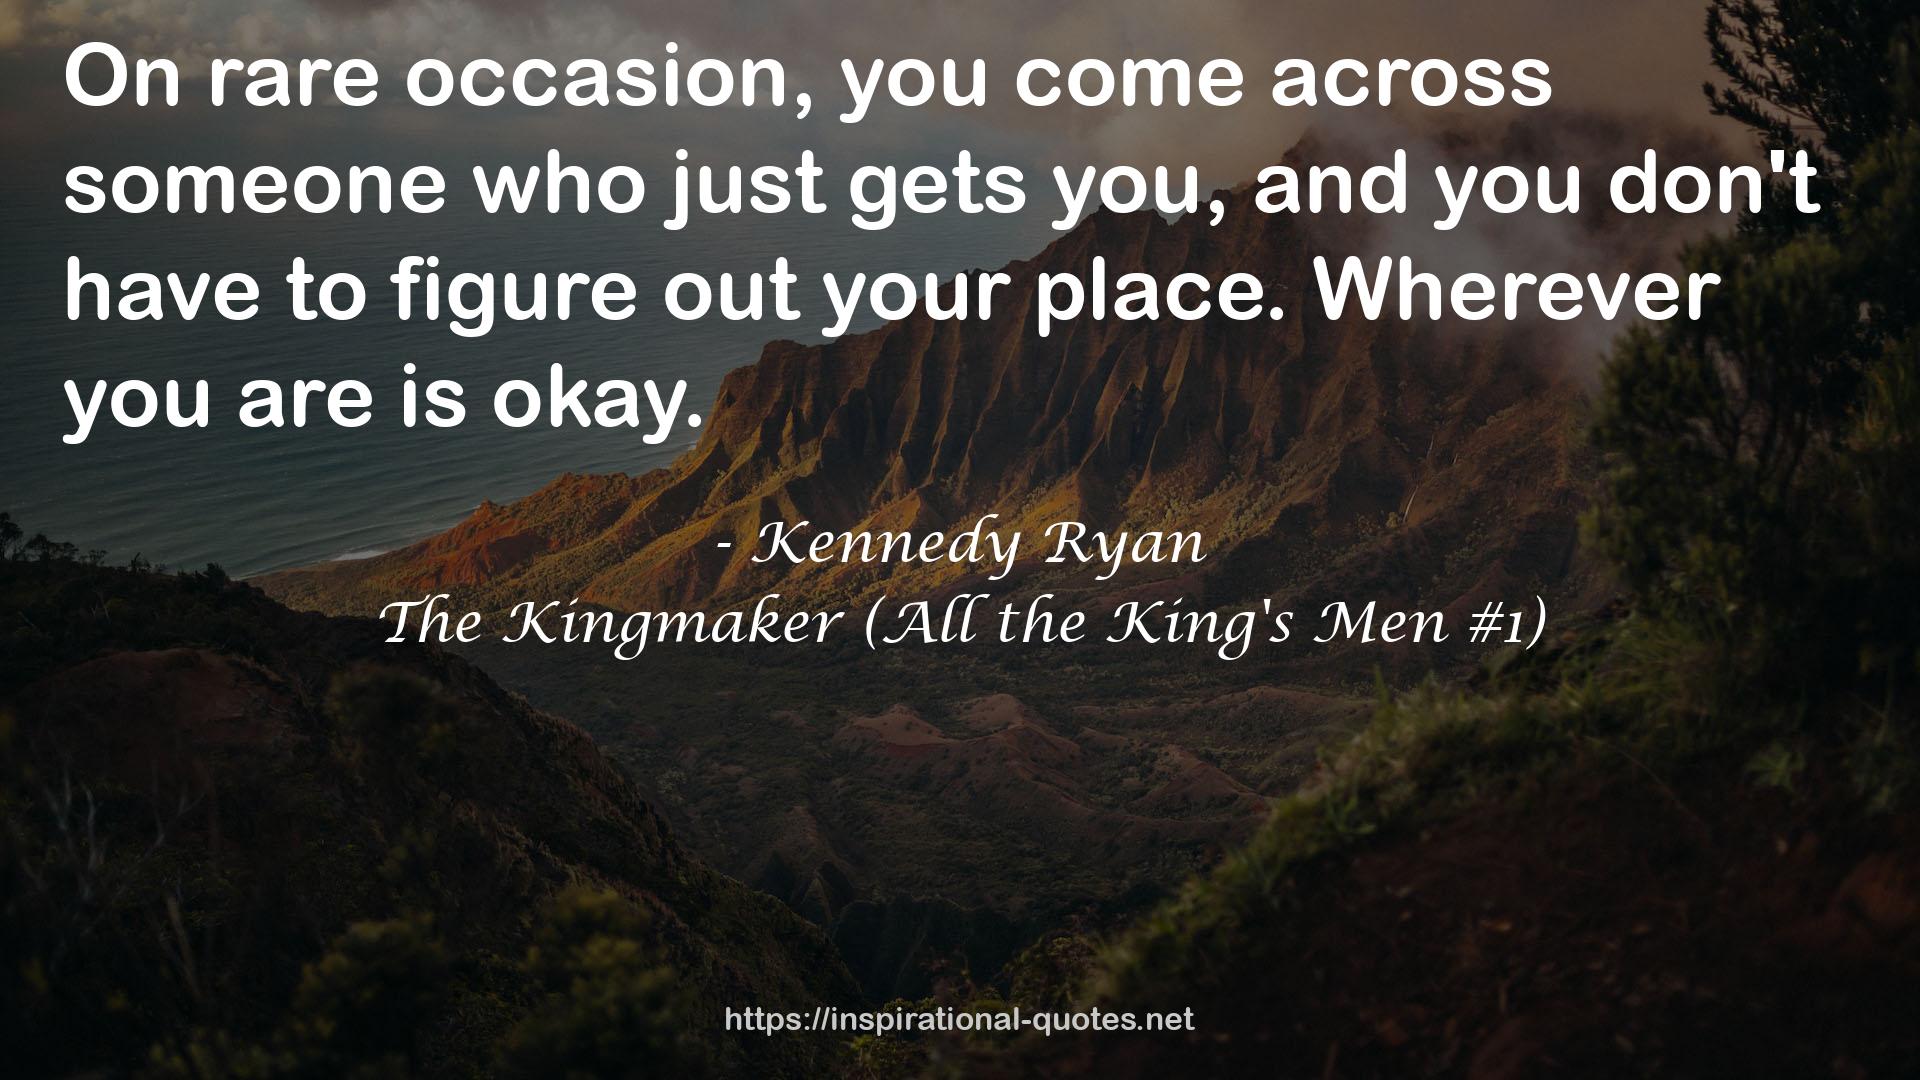 The Kingmaker (All the King's Men #1) QUOTES